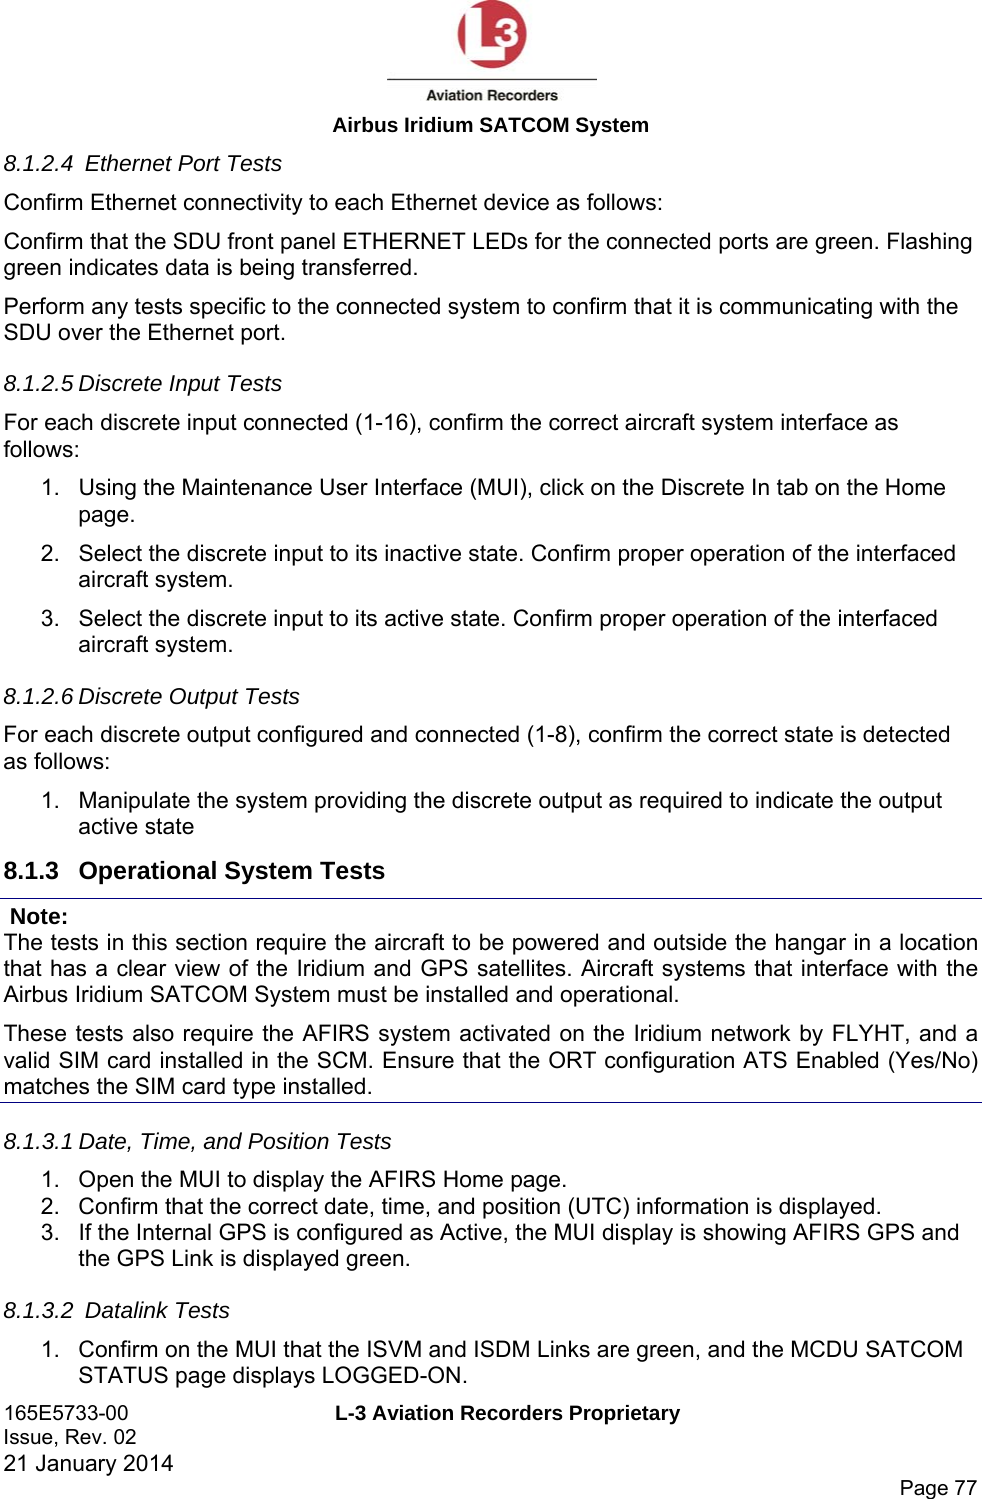  Airbus Iridium SATCOM System 165E5733-00  L-3 Aviation Recorders Proprietary Issue, Rev. 02   21 January 2014      Page 77 8.1.2.4  Ethernet Port Tests Confirm Ethernet connectivity to each Ethernet device as follows: Confirm that the SDU front panel ETHERNET LEDs for the connected ports are green. Flashing green indicates data is being transferred. Perform any tests specific to the connected system to confirm that it is communicating with the SDU over the Ethernet port. 8.1.2.5 Discrete Input Tests For each discrete input connected (1-16), confirm the correct aircraft system interface as follows: 1.  Using the Maintenance User Interface (MUI), click on the Discrete In tab on the Home page. 2.  Select the discrete input to its inactive state. Confirm proper operation of the interfaced aircraft system. 3.  Select the discrete input to its active state. Confirm proper operation of the interfaced aircraft system. 8.1.2.6 Discrete Output Tests For each discrete output configured and connected (1-8), confirm the correct state is detected as follows: 1.  Manipulate the system providing the discrete output as required to indicate the output active state 8.1.3  Operational System Tests  Note: The tests in this section require the aircraft to be powered and outside the hangar in a location that has a clear view of the Iridium and GPS satellites. Aircraft systems that interface with the Airbus Iridium SATCOM System must be installed and operational. These tests also require the AFIRS system activated on the Iridium network by FLYHT, and a valid SIM card installed in the SCM. Ensure that the ORT configuration ATS Enabled (Yes/No) matches the SIM card type installed.  8.1.3.1 Date, Time, and Position Tests 1.  Open the MUI to display the AFIRS Home page. 2.  Confirm that the correct date, time, and position (UTC) information is displayed. 3.  If the Internal GPS is configured as Active, the MUI display is showing AFIRS GPS and the GPS Link is displayed green. 8.1.3.2  Datalink Tests 1.  Confirm on the MUI that the ISVM and ISDM Links are green, and the MCDU SATCOM STATUS page displays LOGGED-ON. 